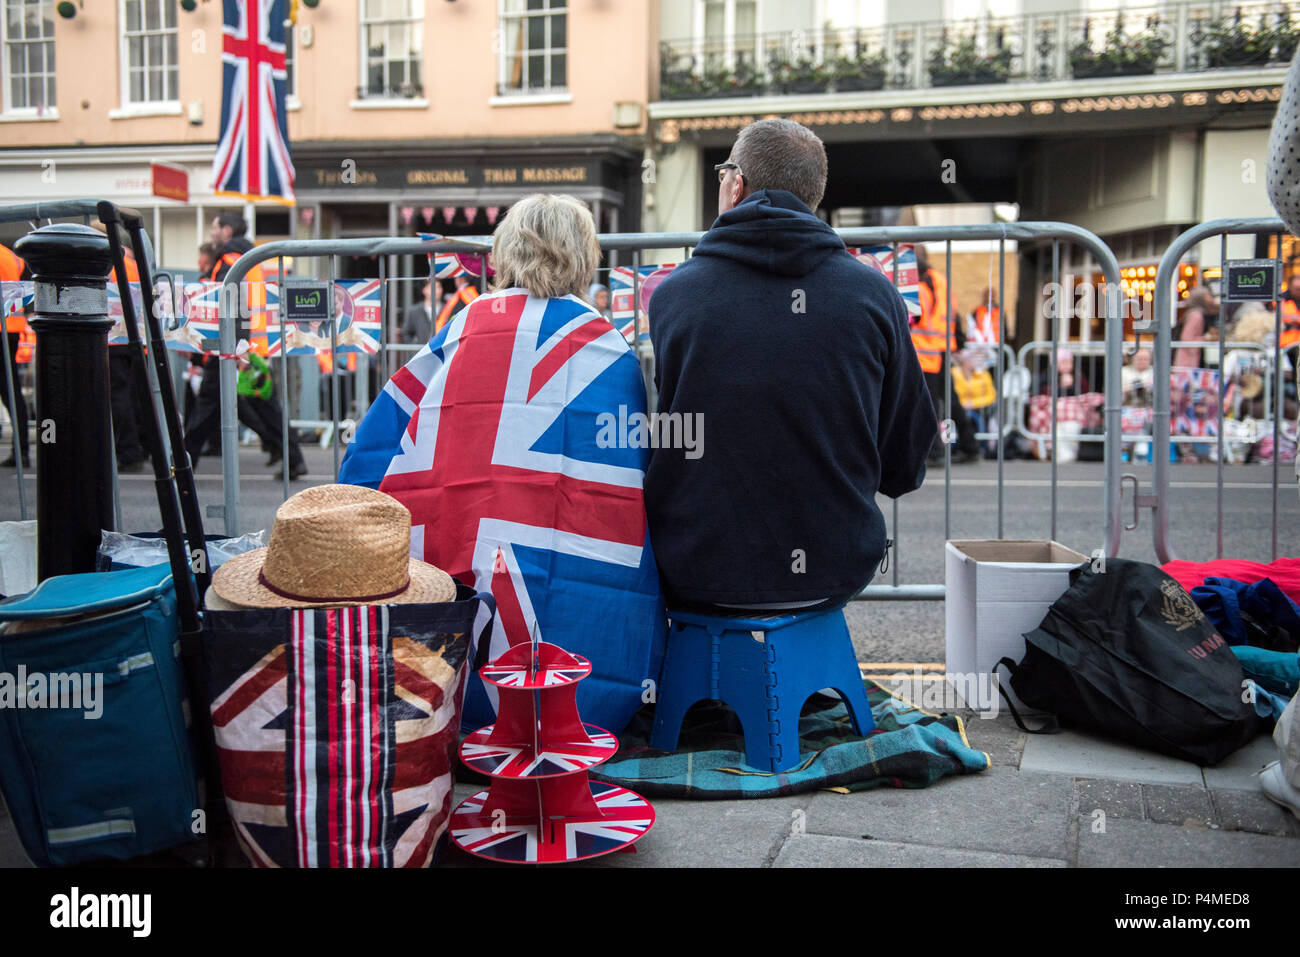 Two people awake early on the morning of the royal wedding of HRH Prince Harry and Ms. Meghan Markle. They sit up on steps and watch arriving volunteers and council workers walking along the streets of Windsor to take up positions for the event. Stock Photo